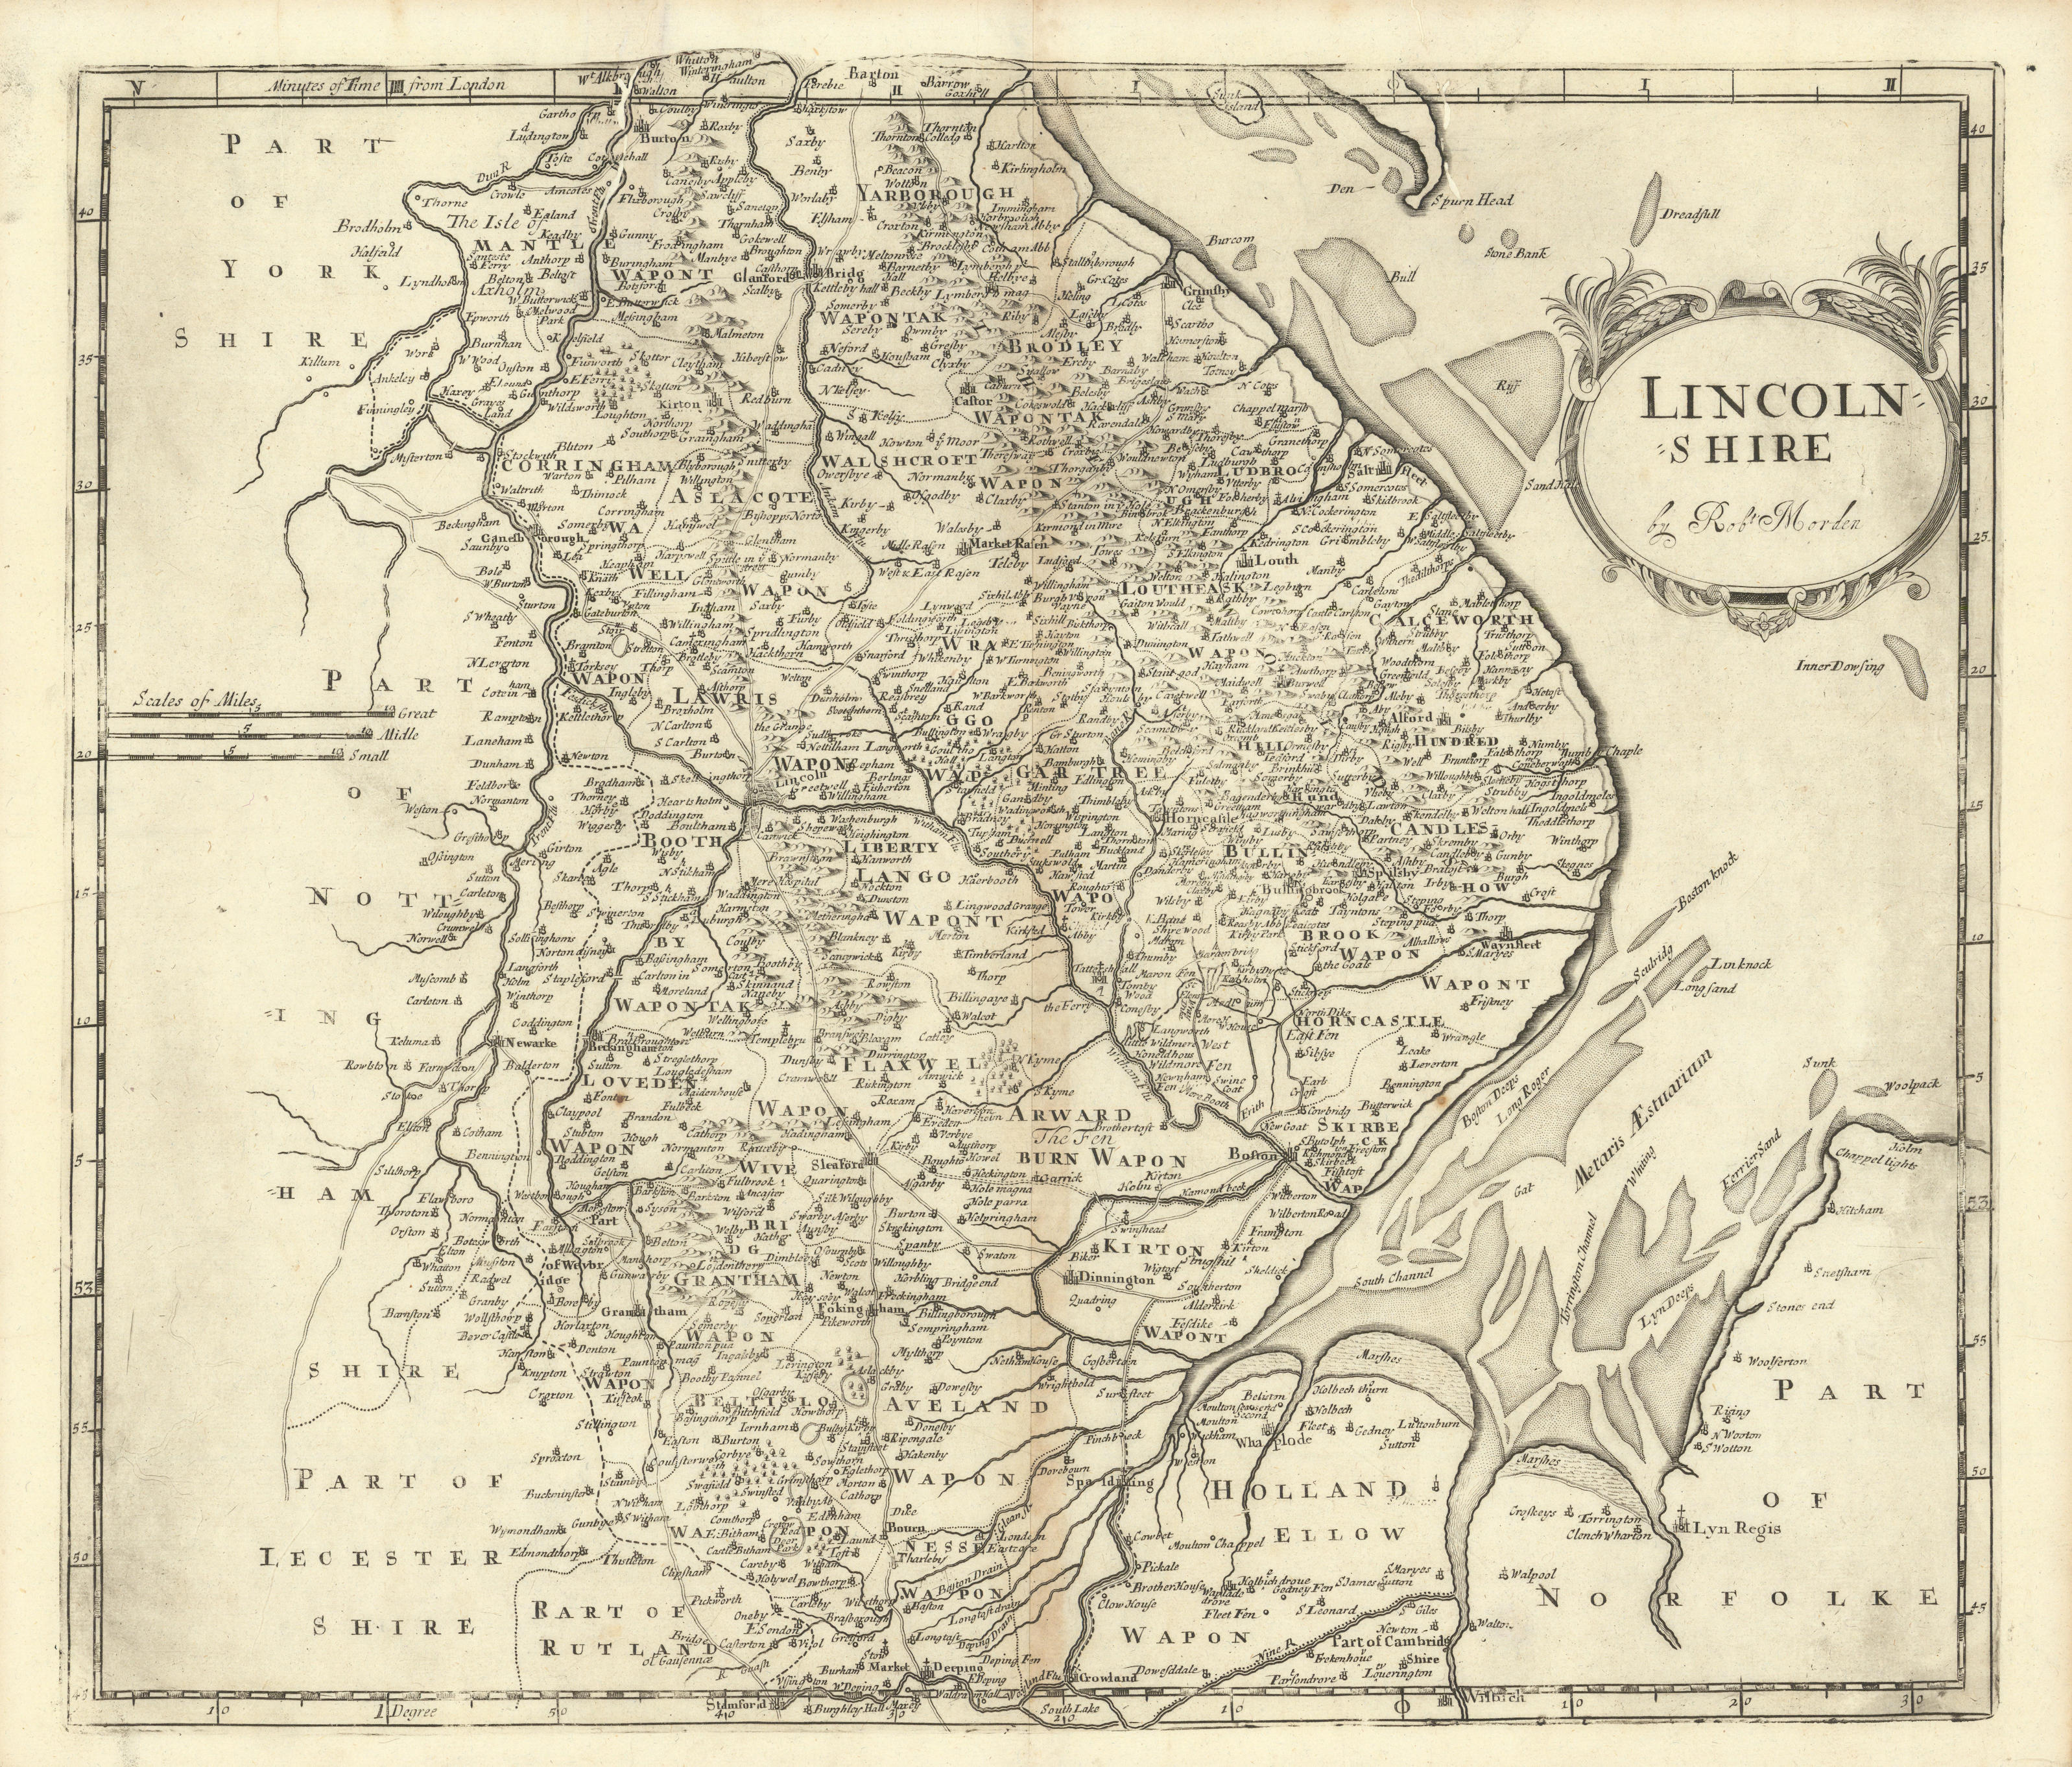 Associate Product Lincolnshire. 'LINCOLN SHIRE' by ROBERT MORDEN from Camden's Britannia 1695 map